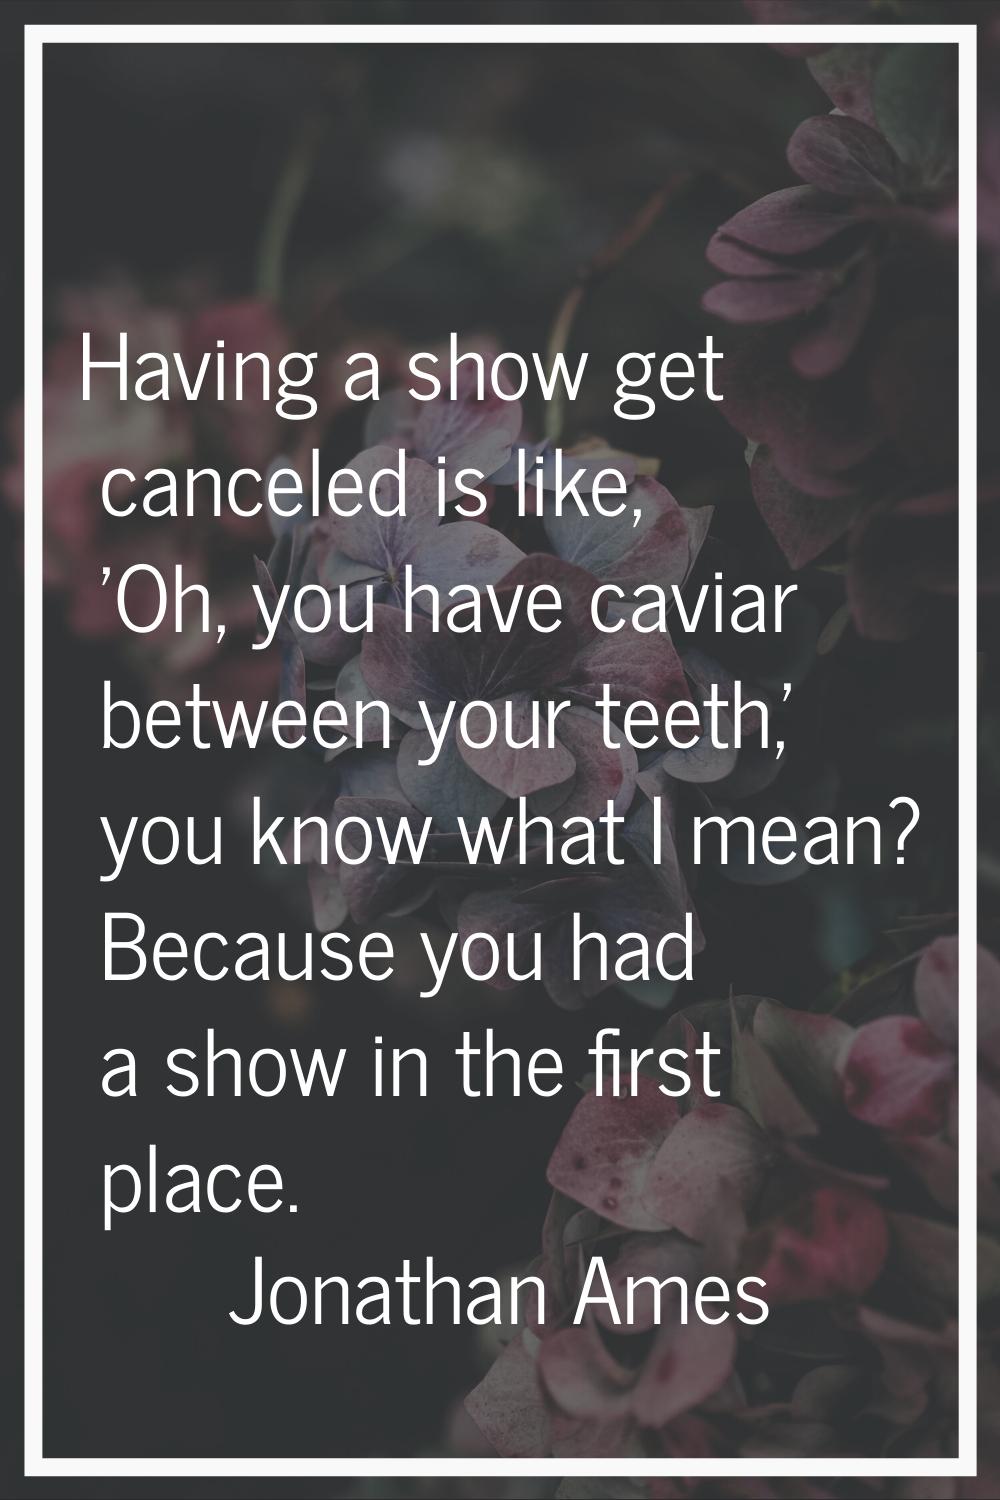 Having a show get canceled is like, 'Oh, you have caviar between your teeth,' you know what I mean?